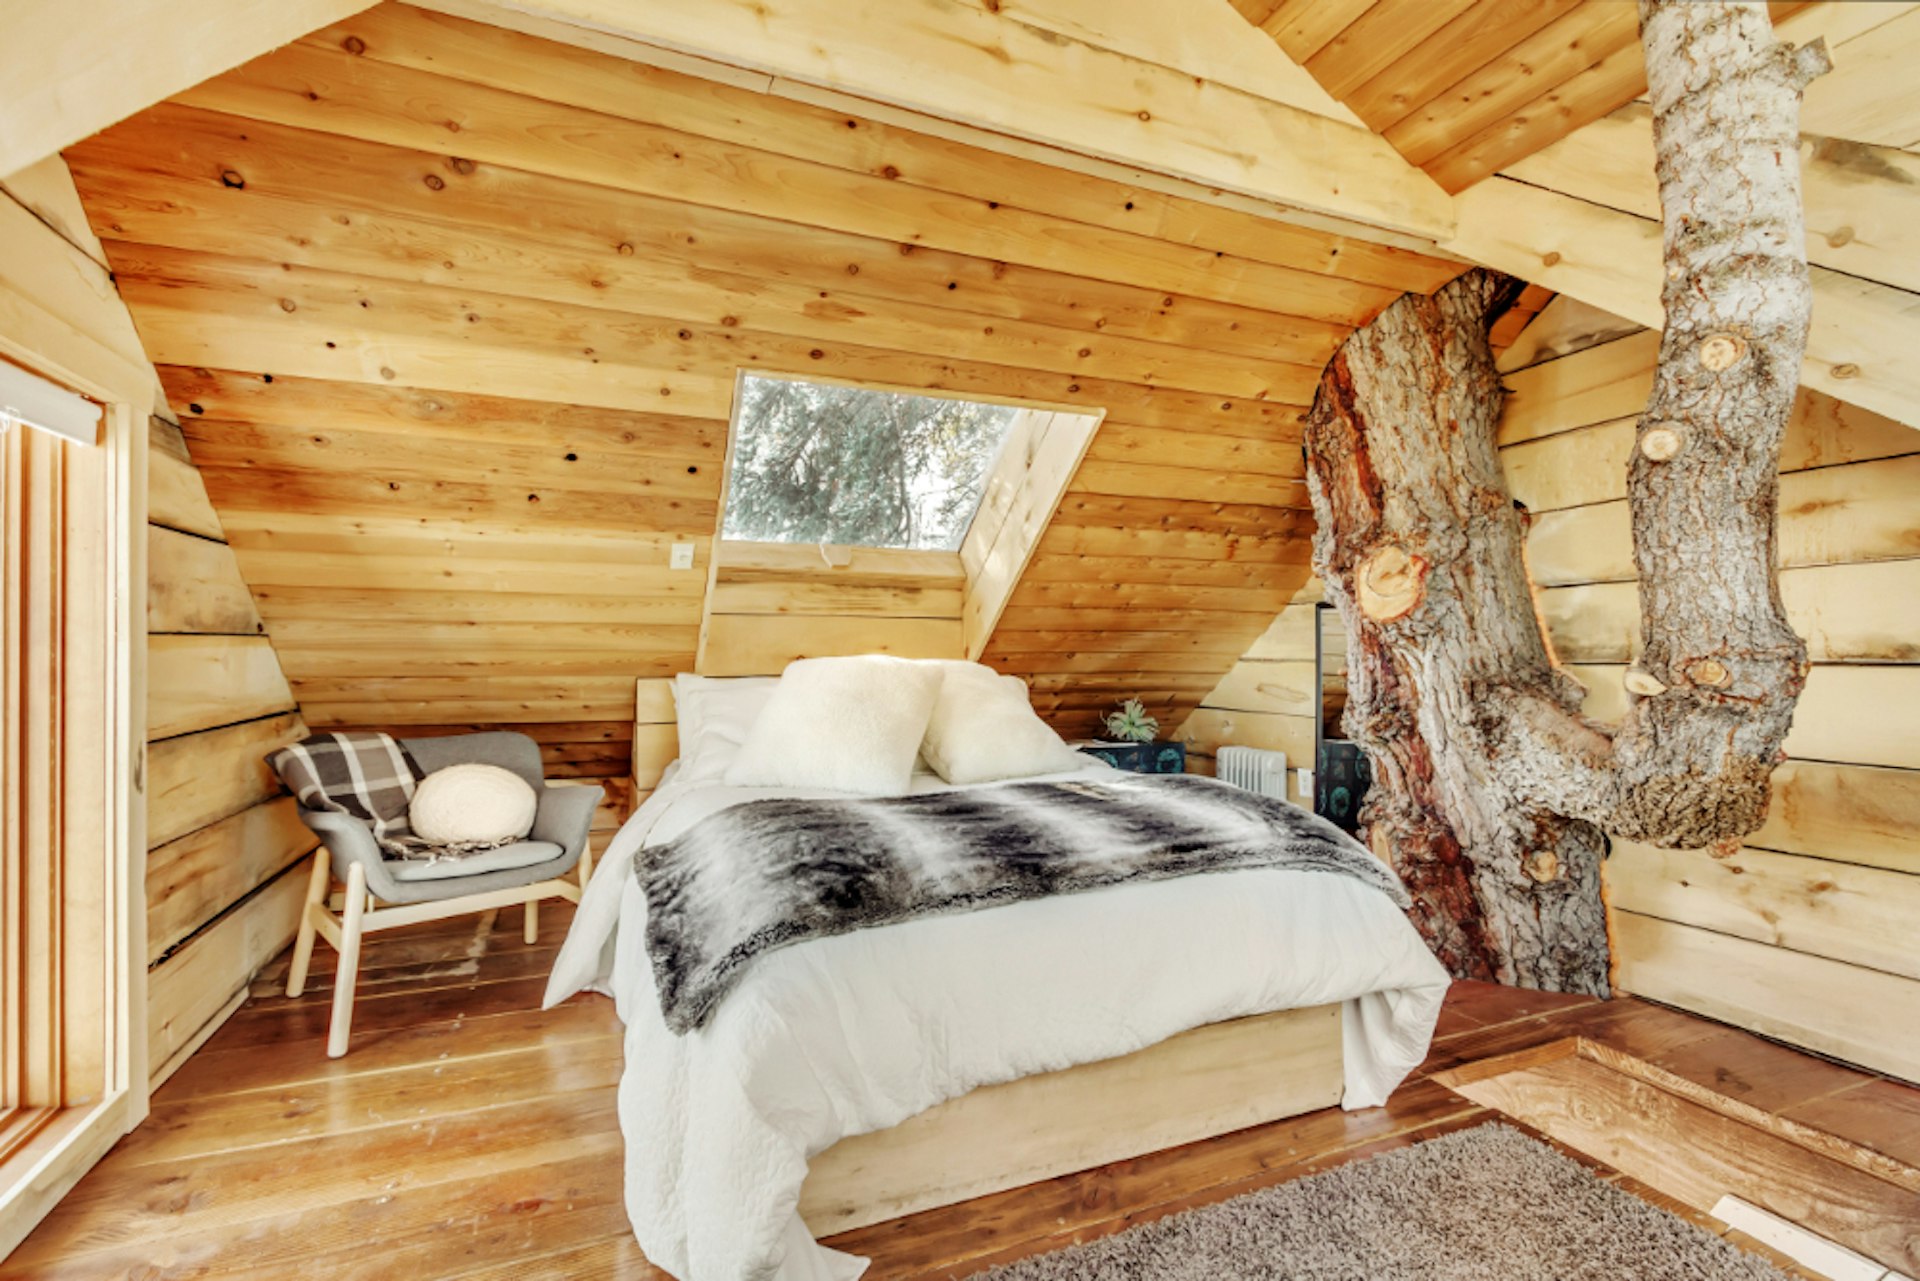 A bedroom in a treehouse in Utah with a tree growing through it